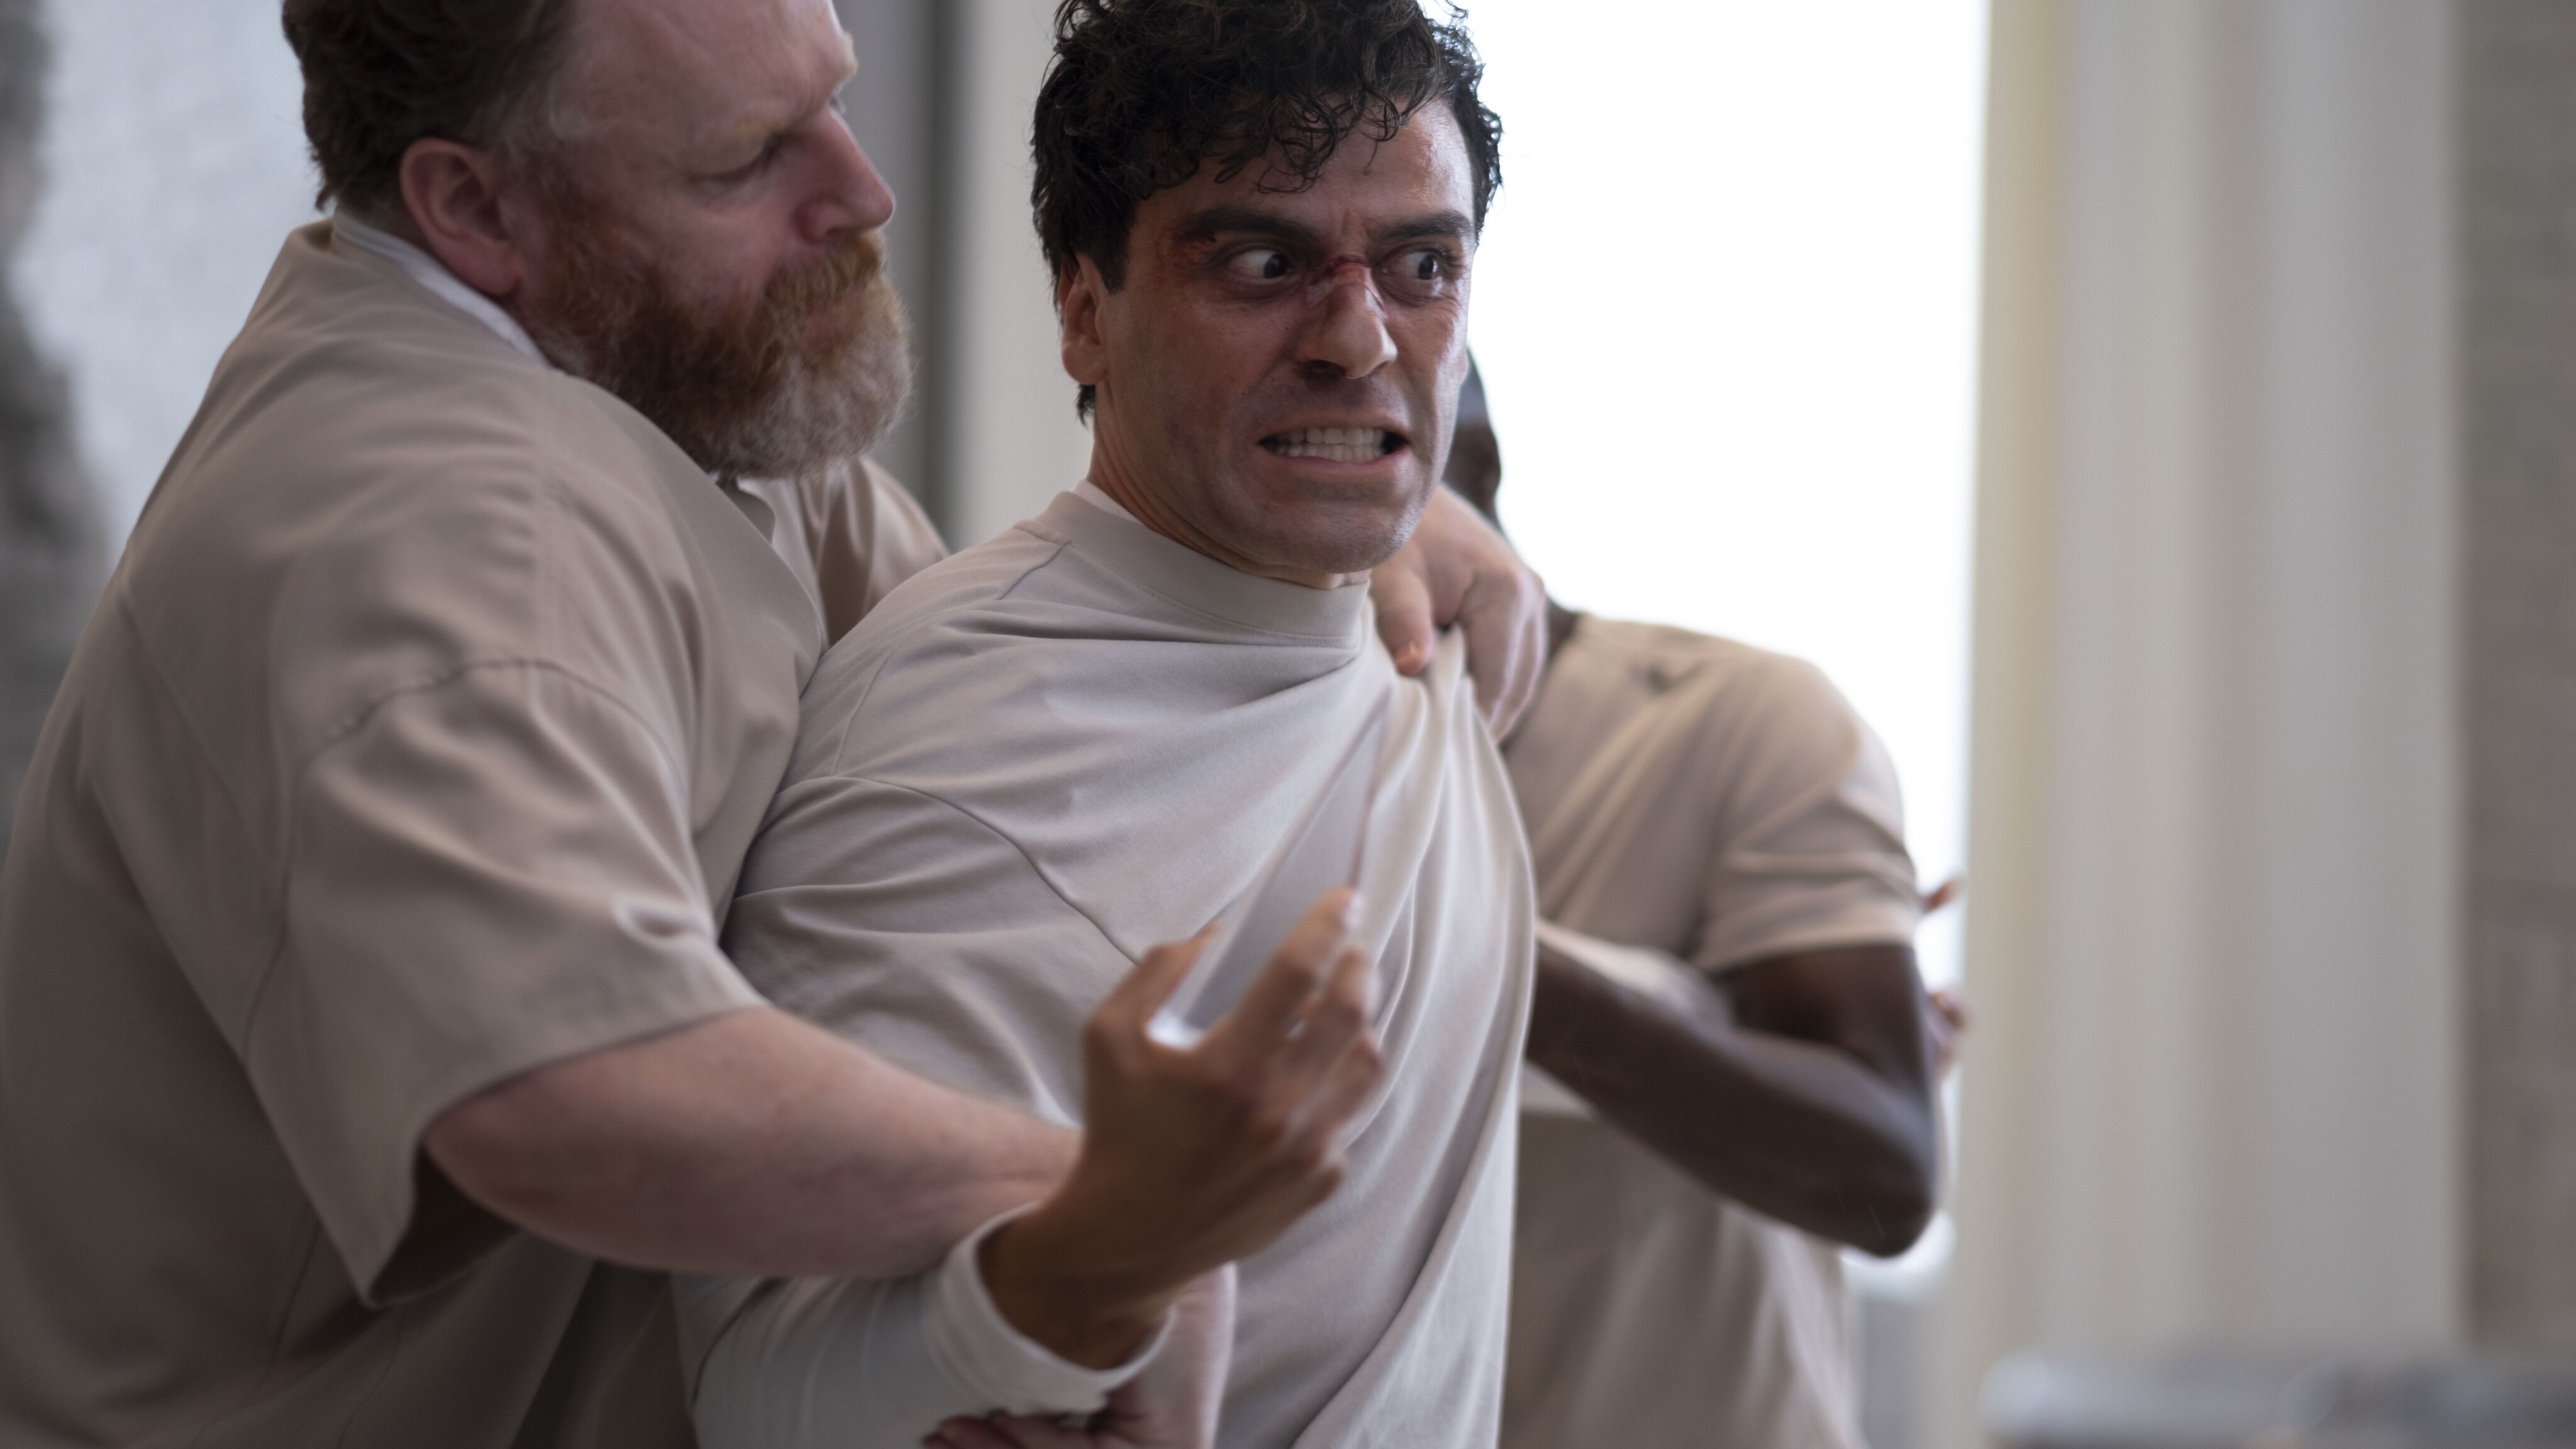 (L-R): David Ganly as Billy Fitzgerald, Oscar Isaac as Marc Spector/Steven Grant, and Ann Akin as Bobbi Kennedy in Marvel Studios' MOON KNIGHT, exclusively on Disney+. Photo by Gabor Kotchy. ©Marvel Studios 2022. All Rights Reserved.